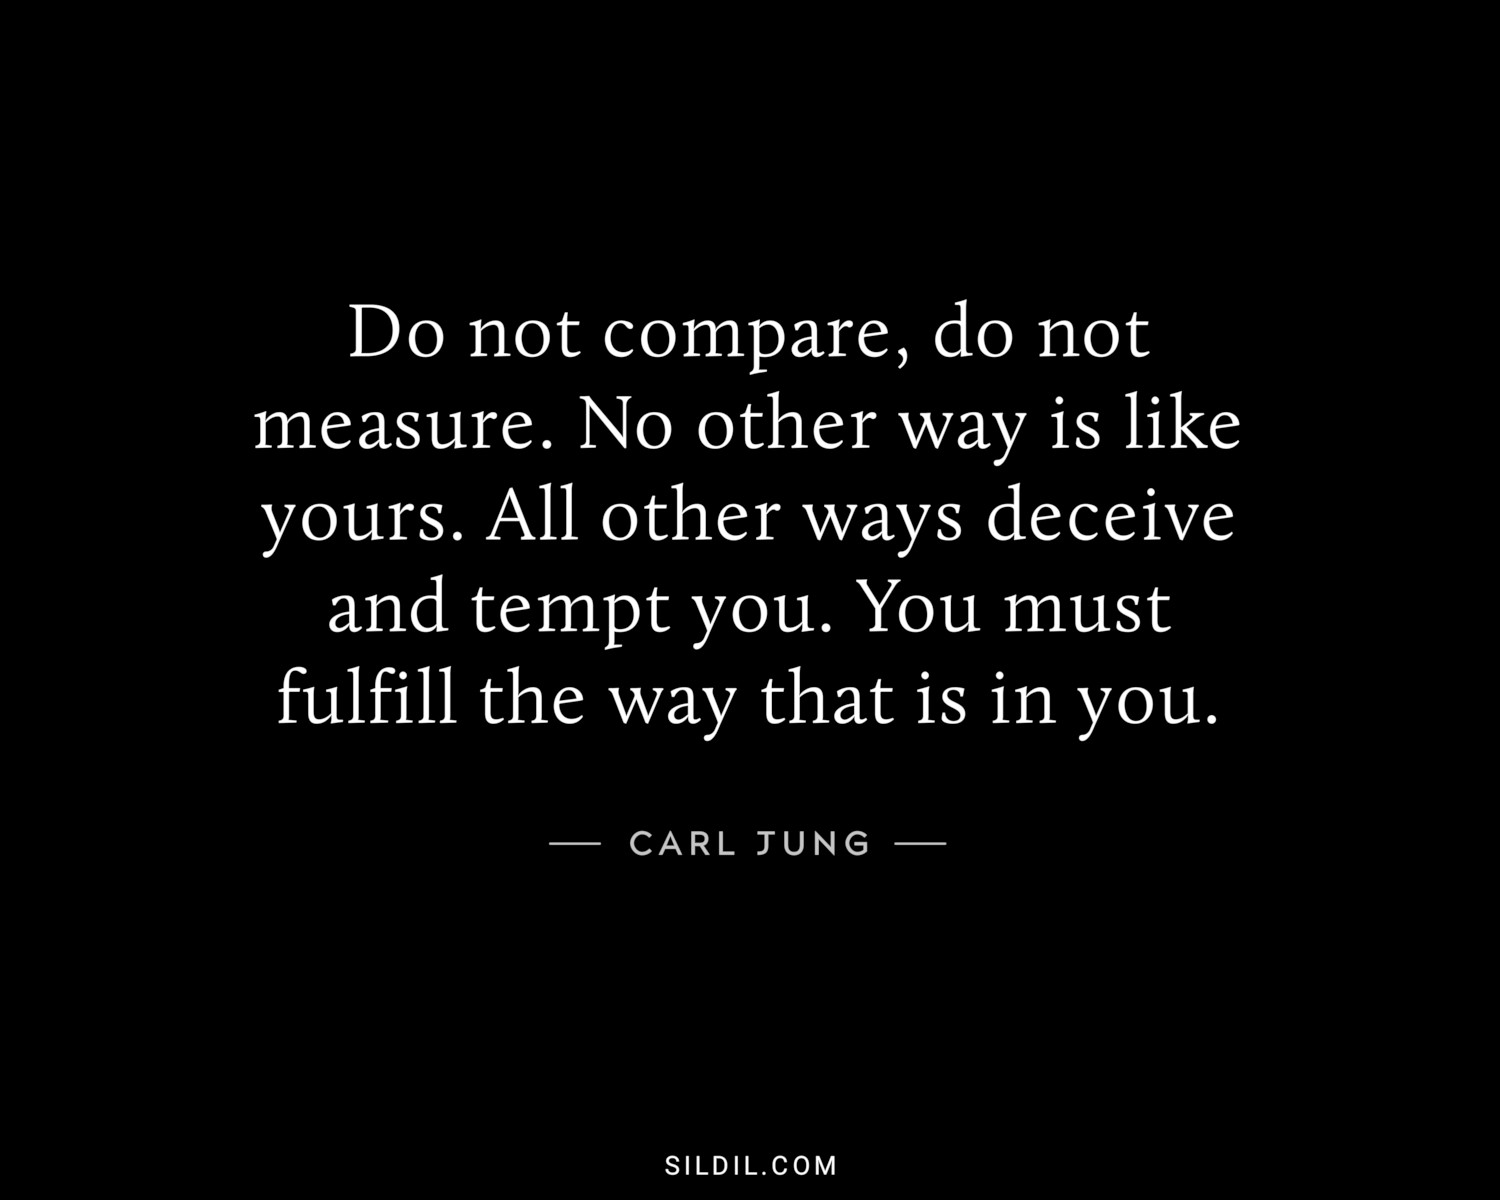 Do not compare, do not measure. No other way is like yours. All other ways deceive and tempt you. You must fulfill the way that is in you.